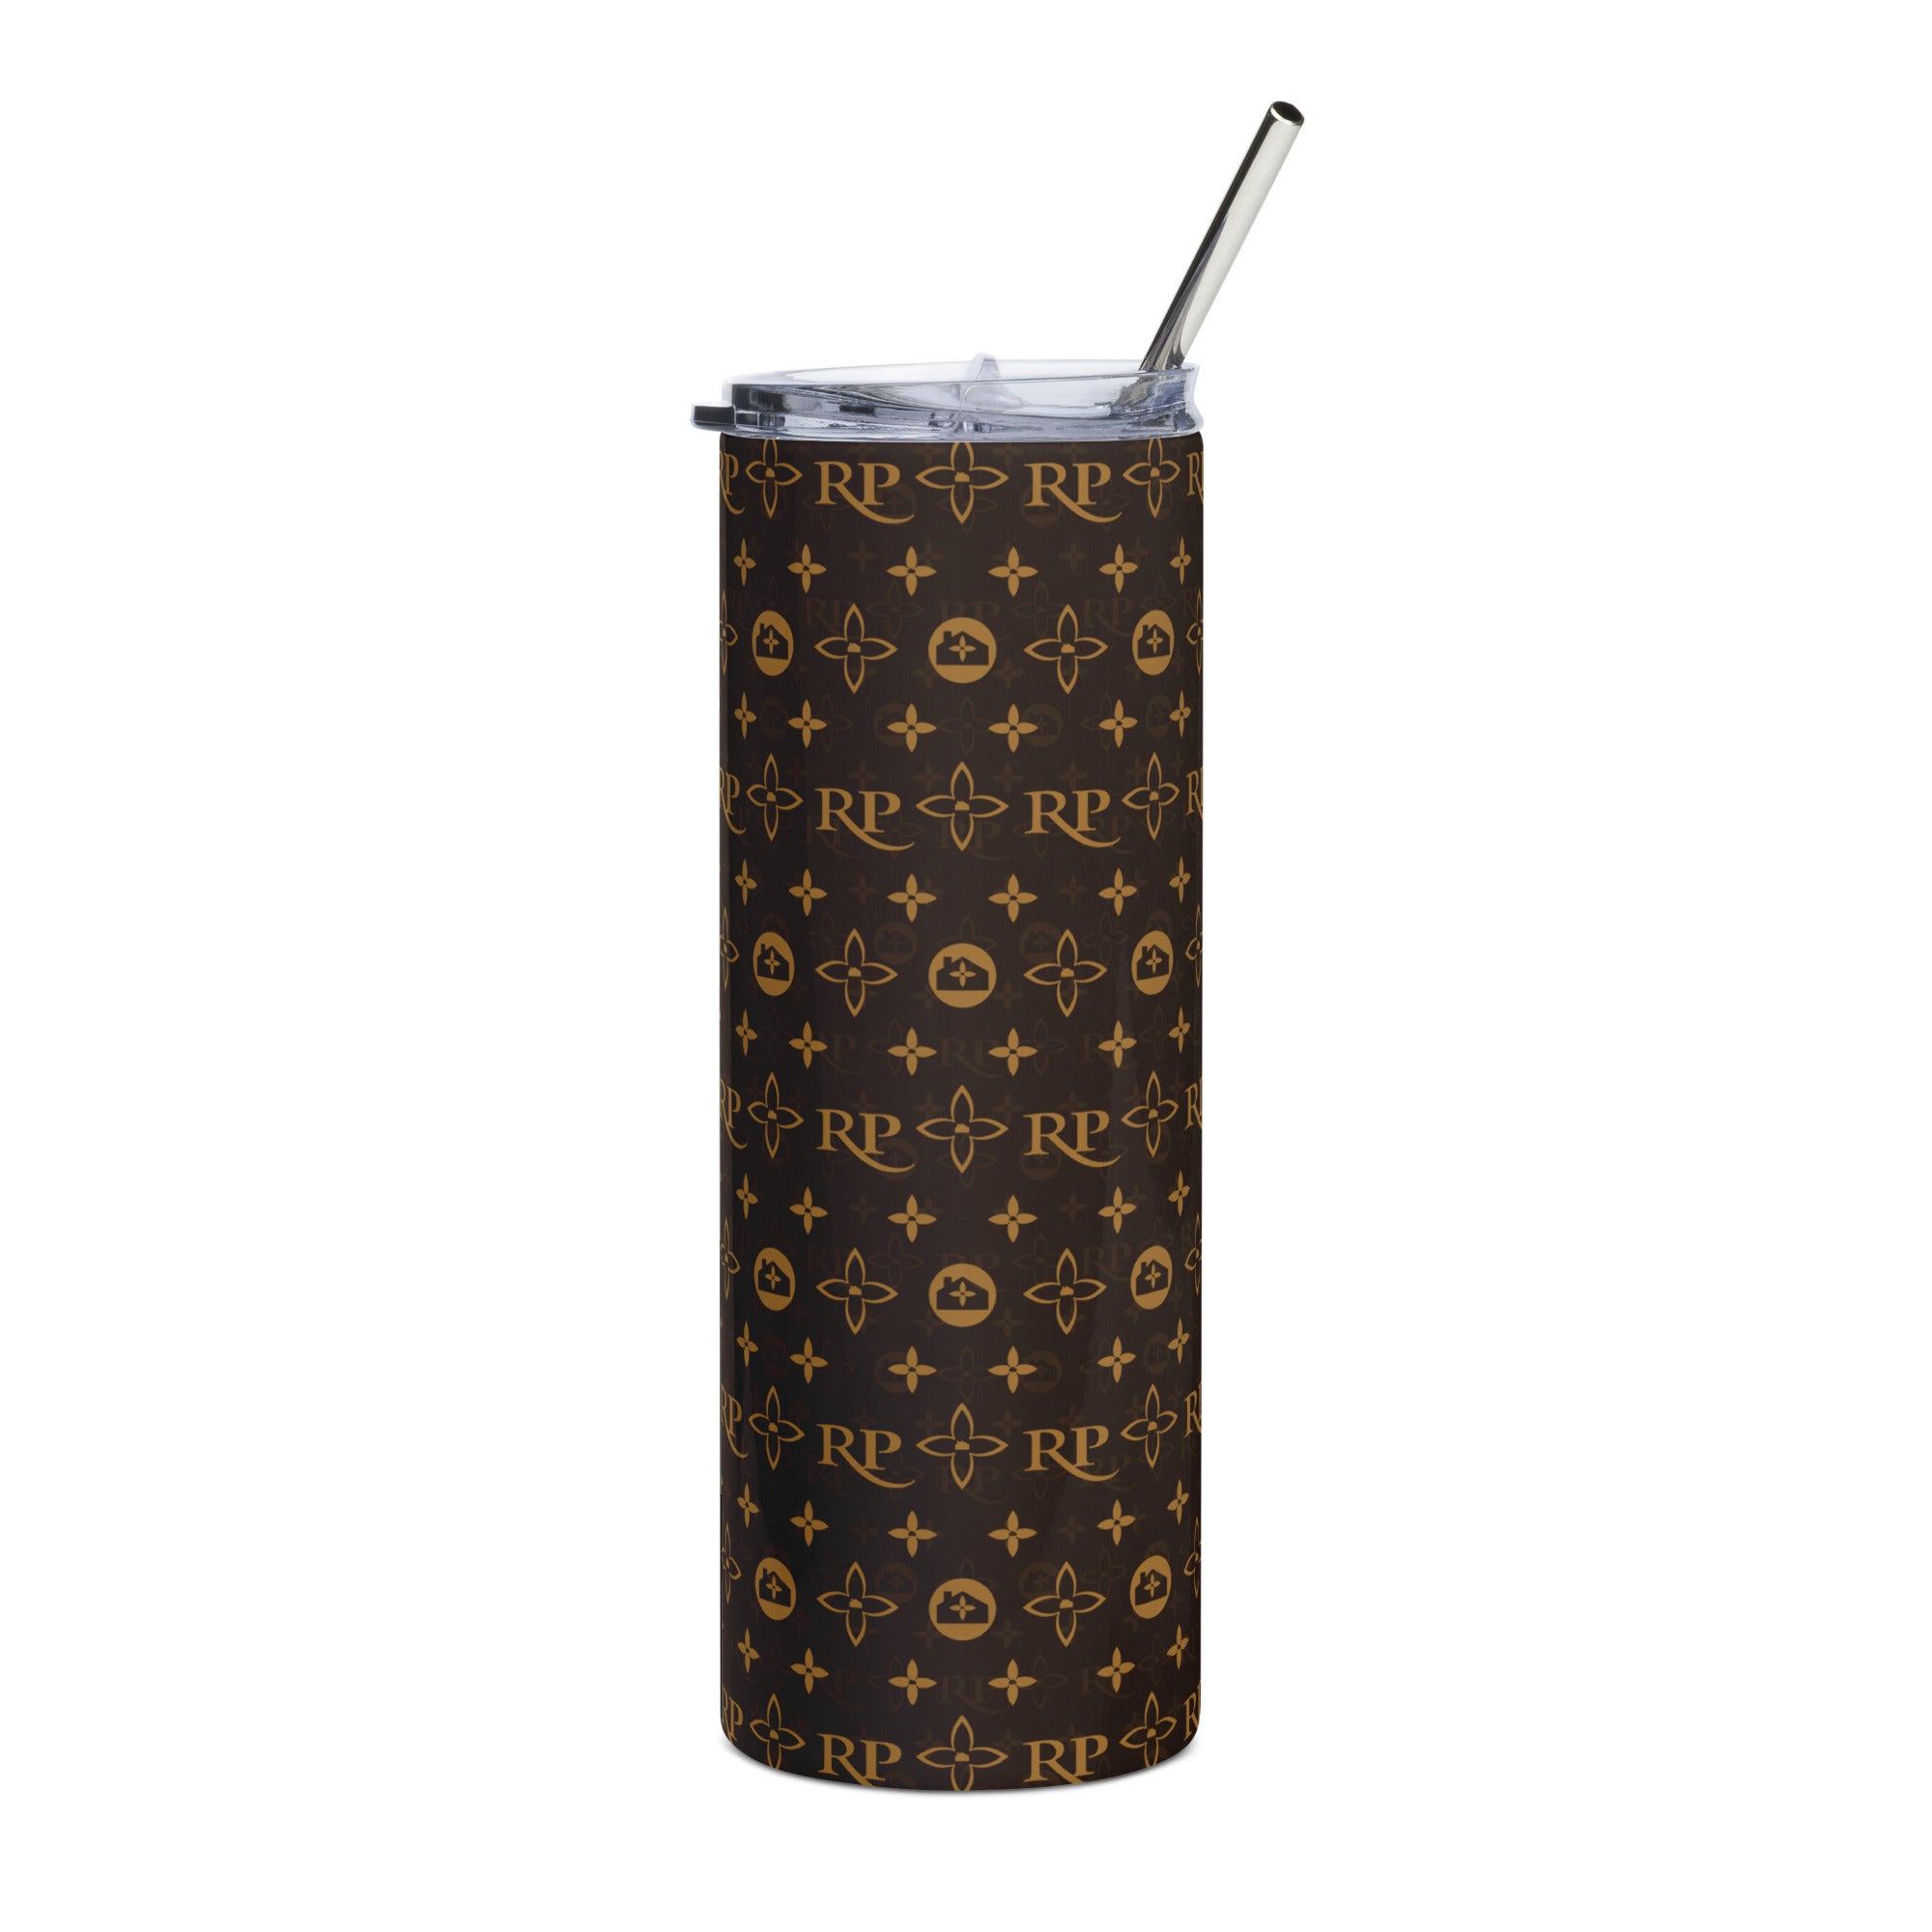 RP LV-Stainless steel tumbler - Real Team Shop